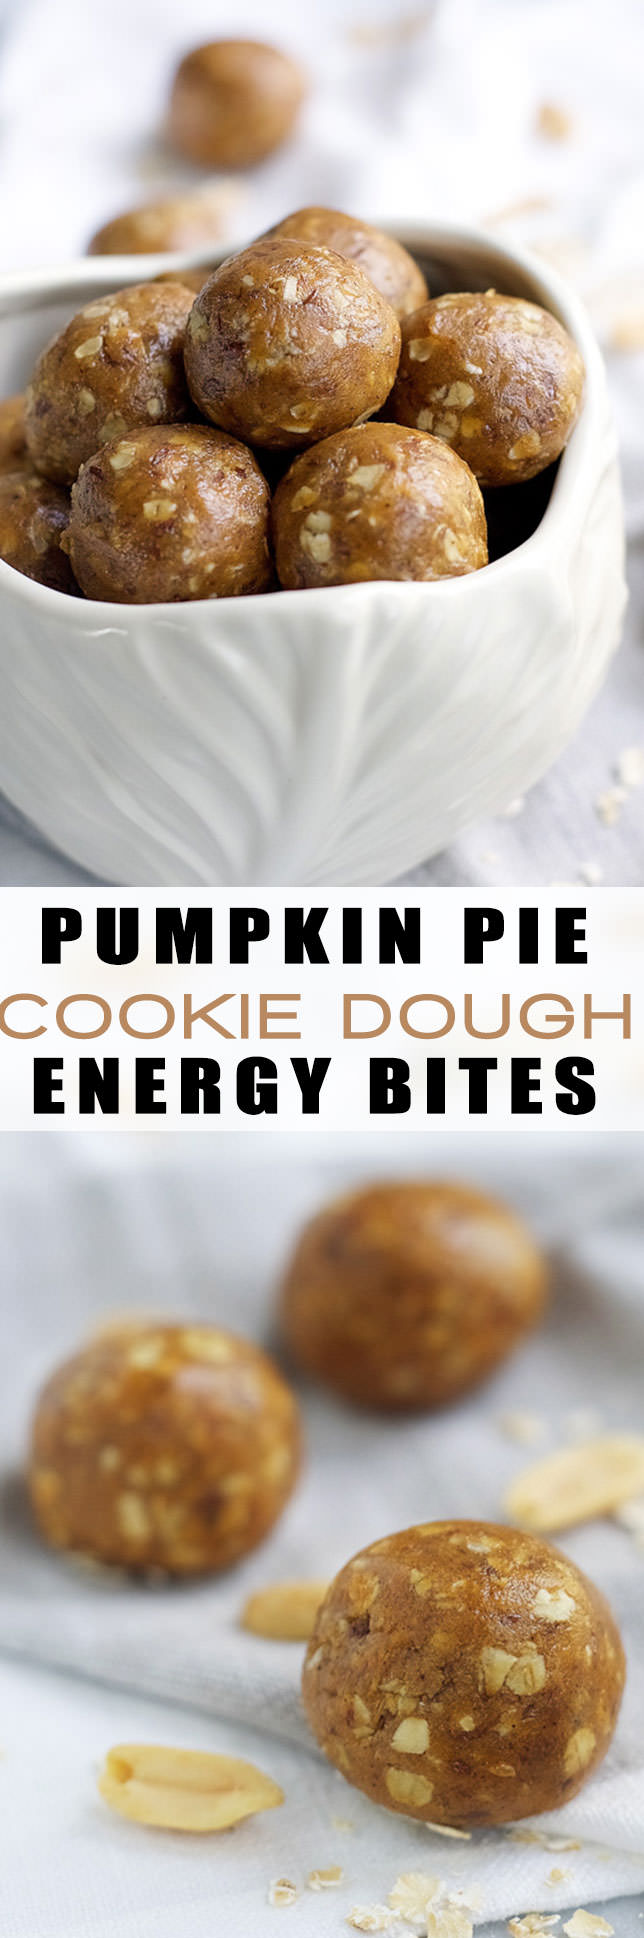 A good for you snack made with wholesome ingredients and have all the flavors of fall! Pumpkin Pie Cookie Dough Energy Balls will help curb your craving for sweets, yet are healthy for you!